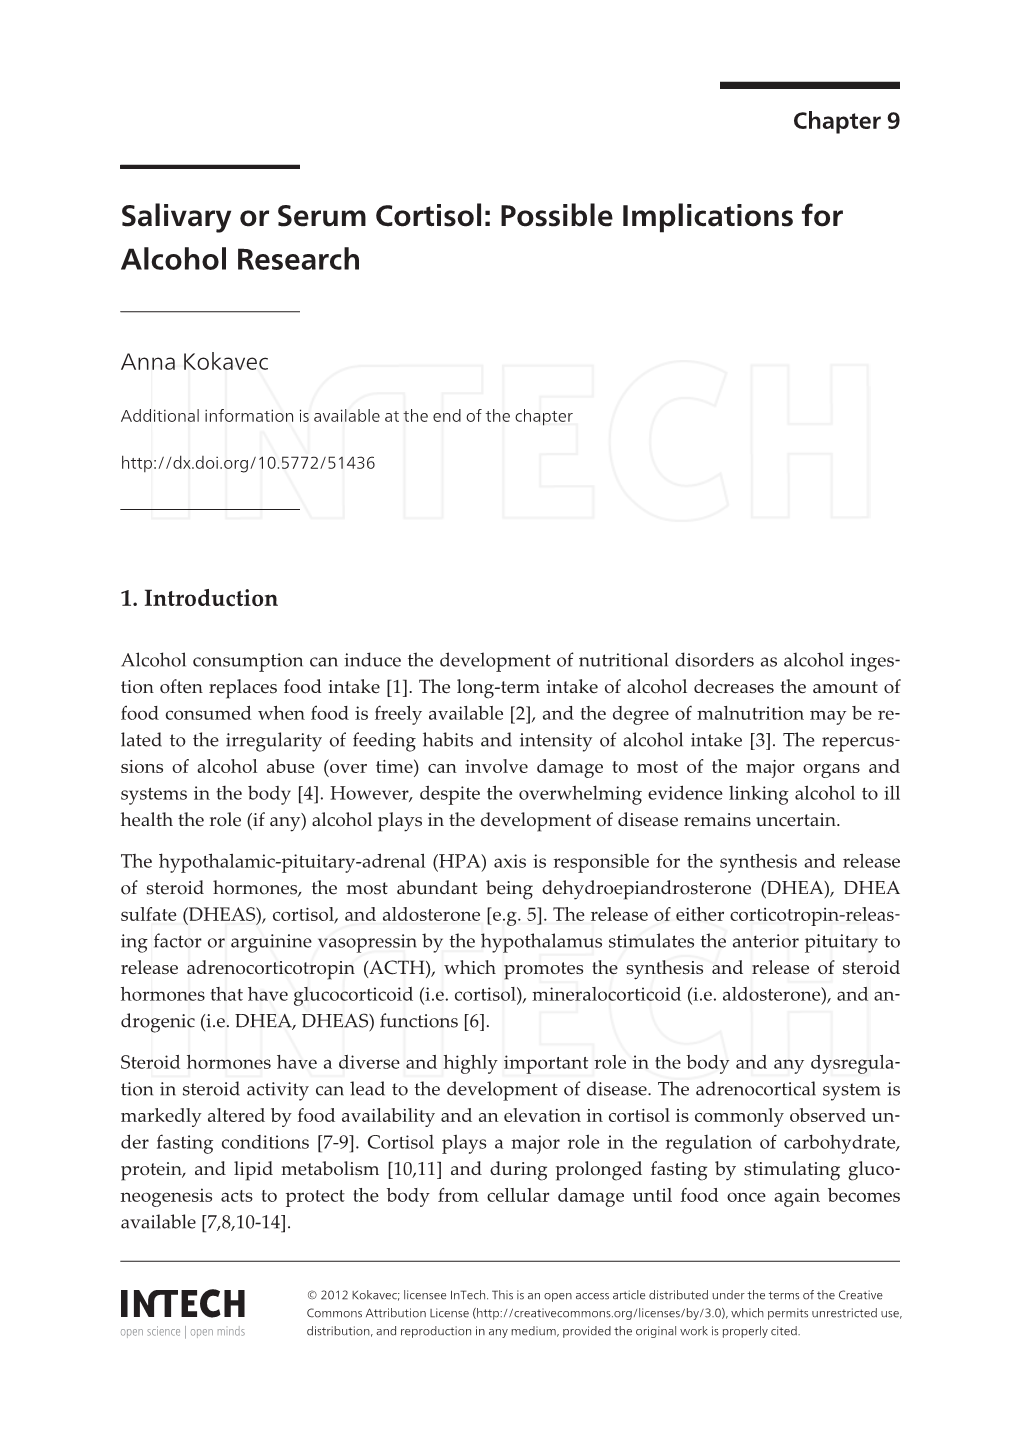 Salivary Or Serum Cortisol: Possible Implications for Alcohol Research